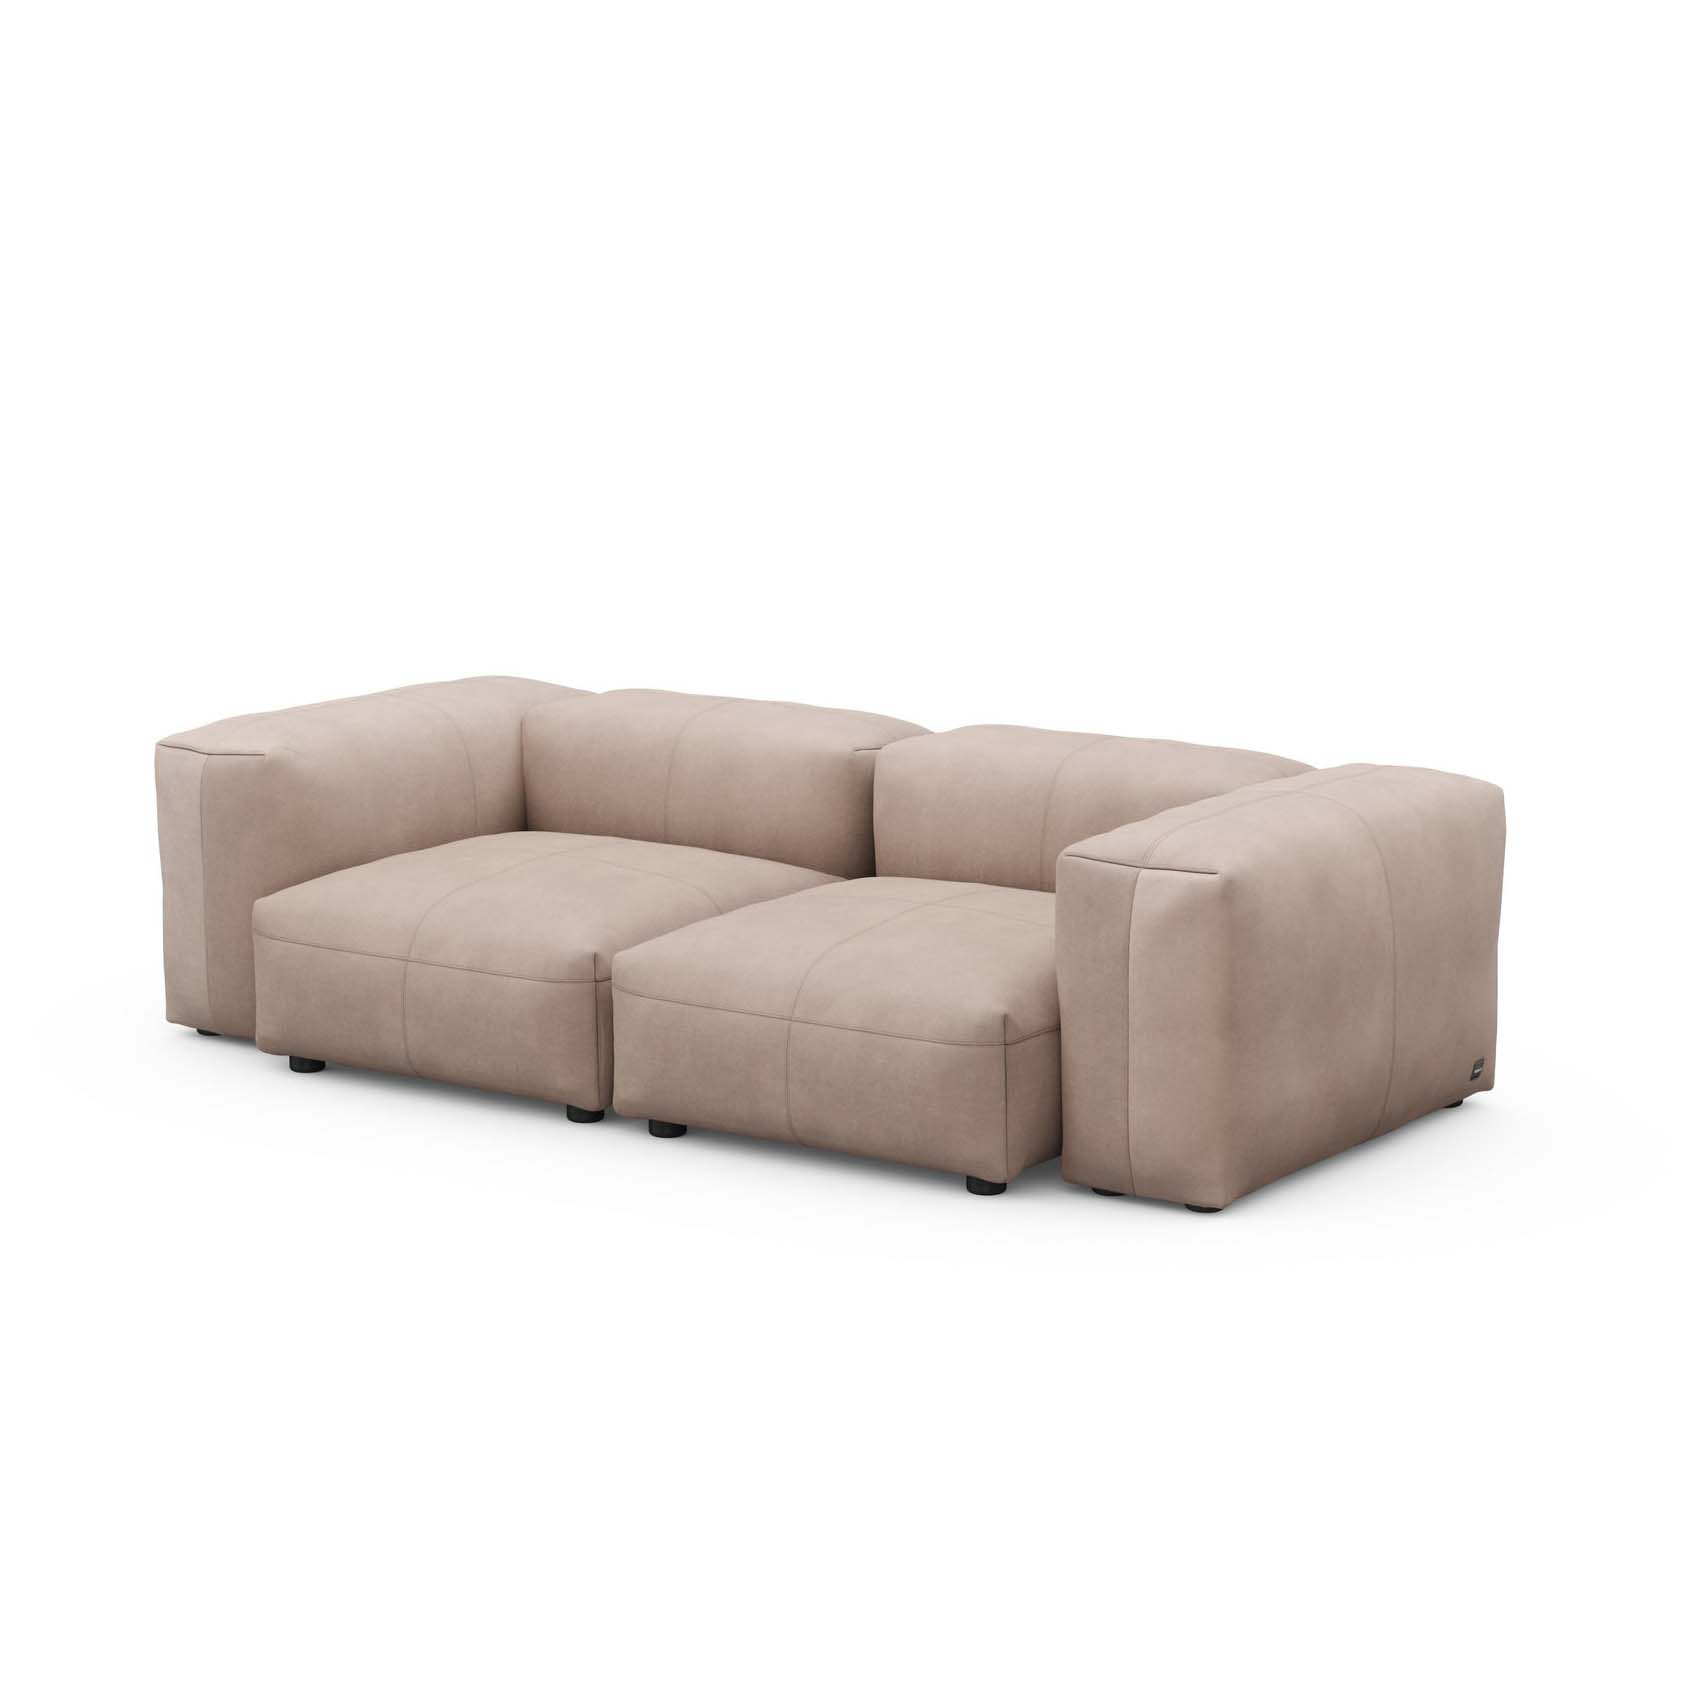 Two Seat Sofa S Leather Stone